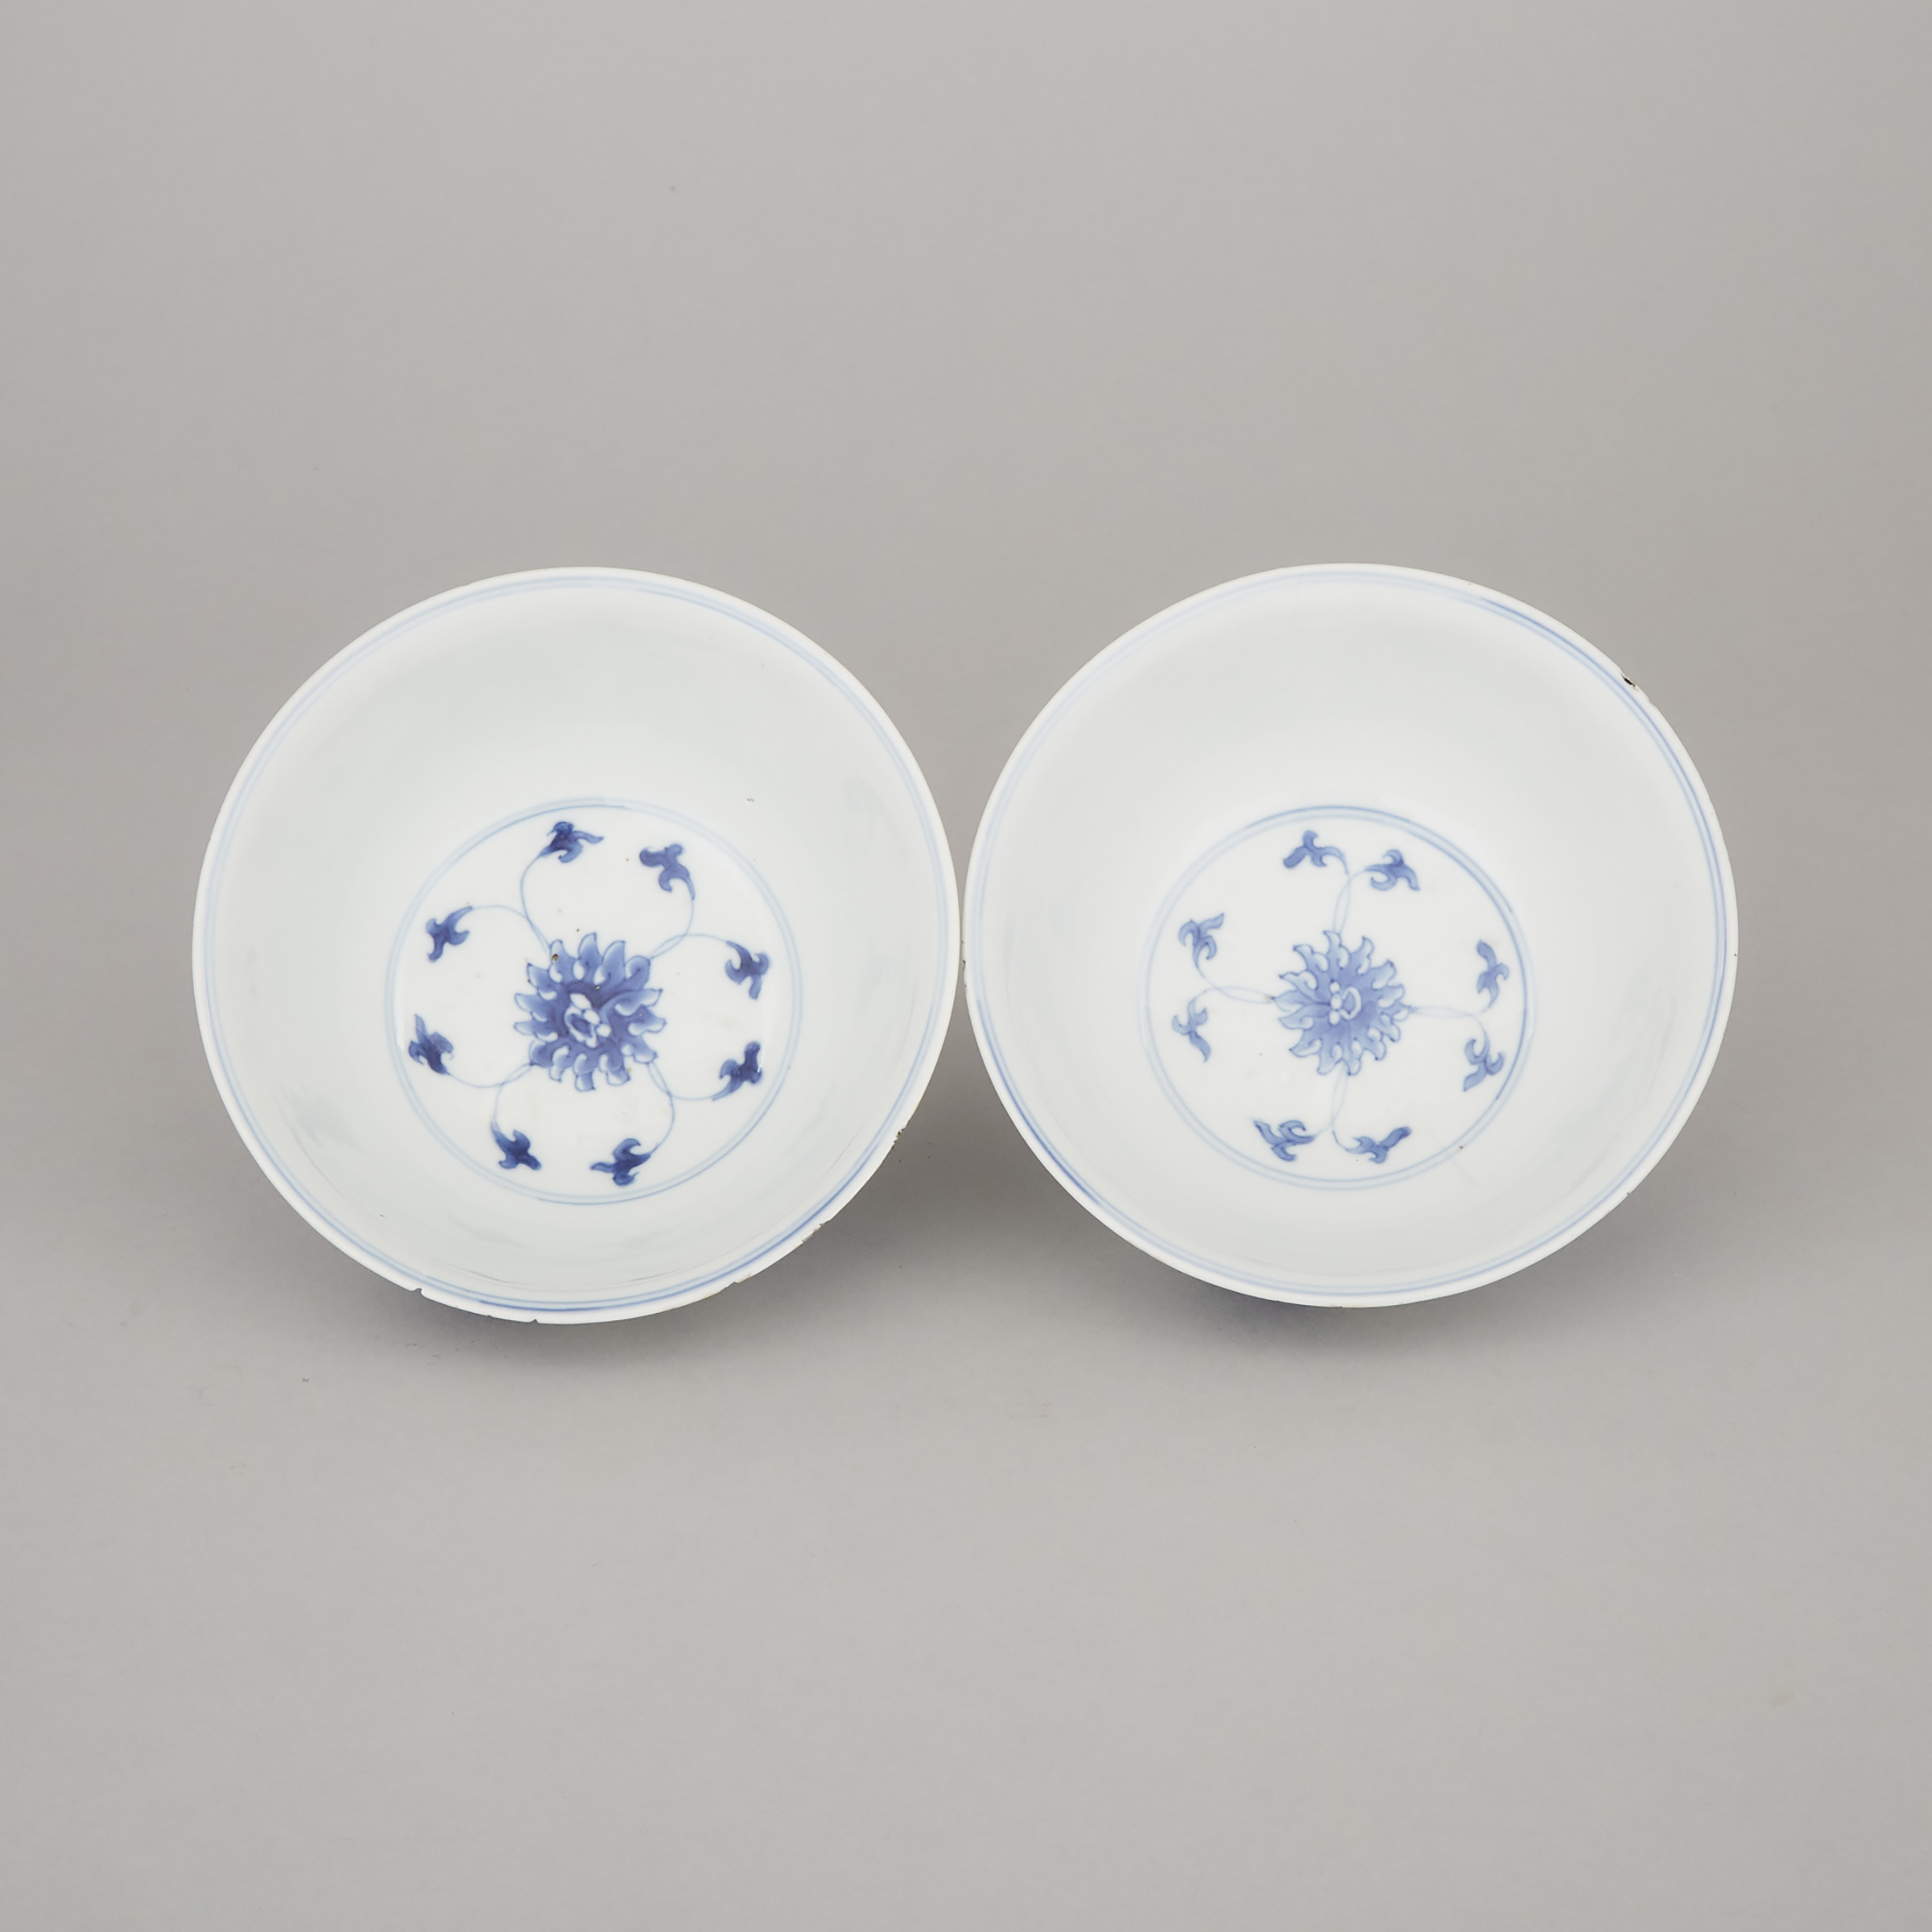 A Pair of Blue and White 'Peony' Bowls, Chenghua Mark, Kangxi Period (1662-1722)